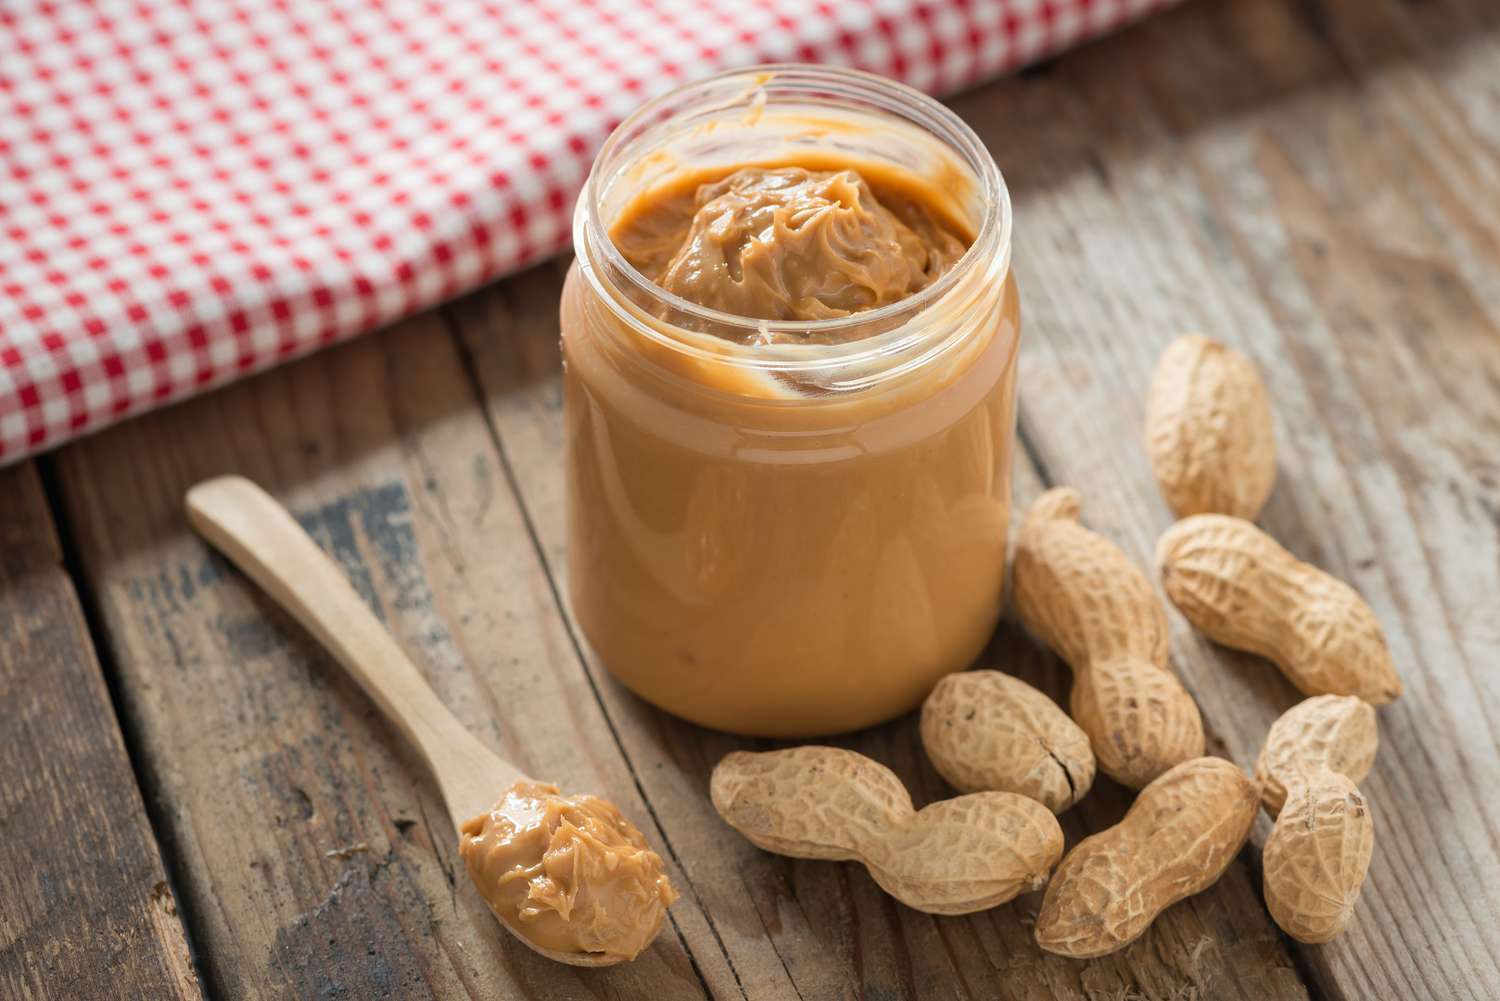 Jar of Peanut Butter Creamy and Whole Peanuts on Table